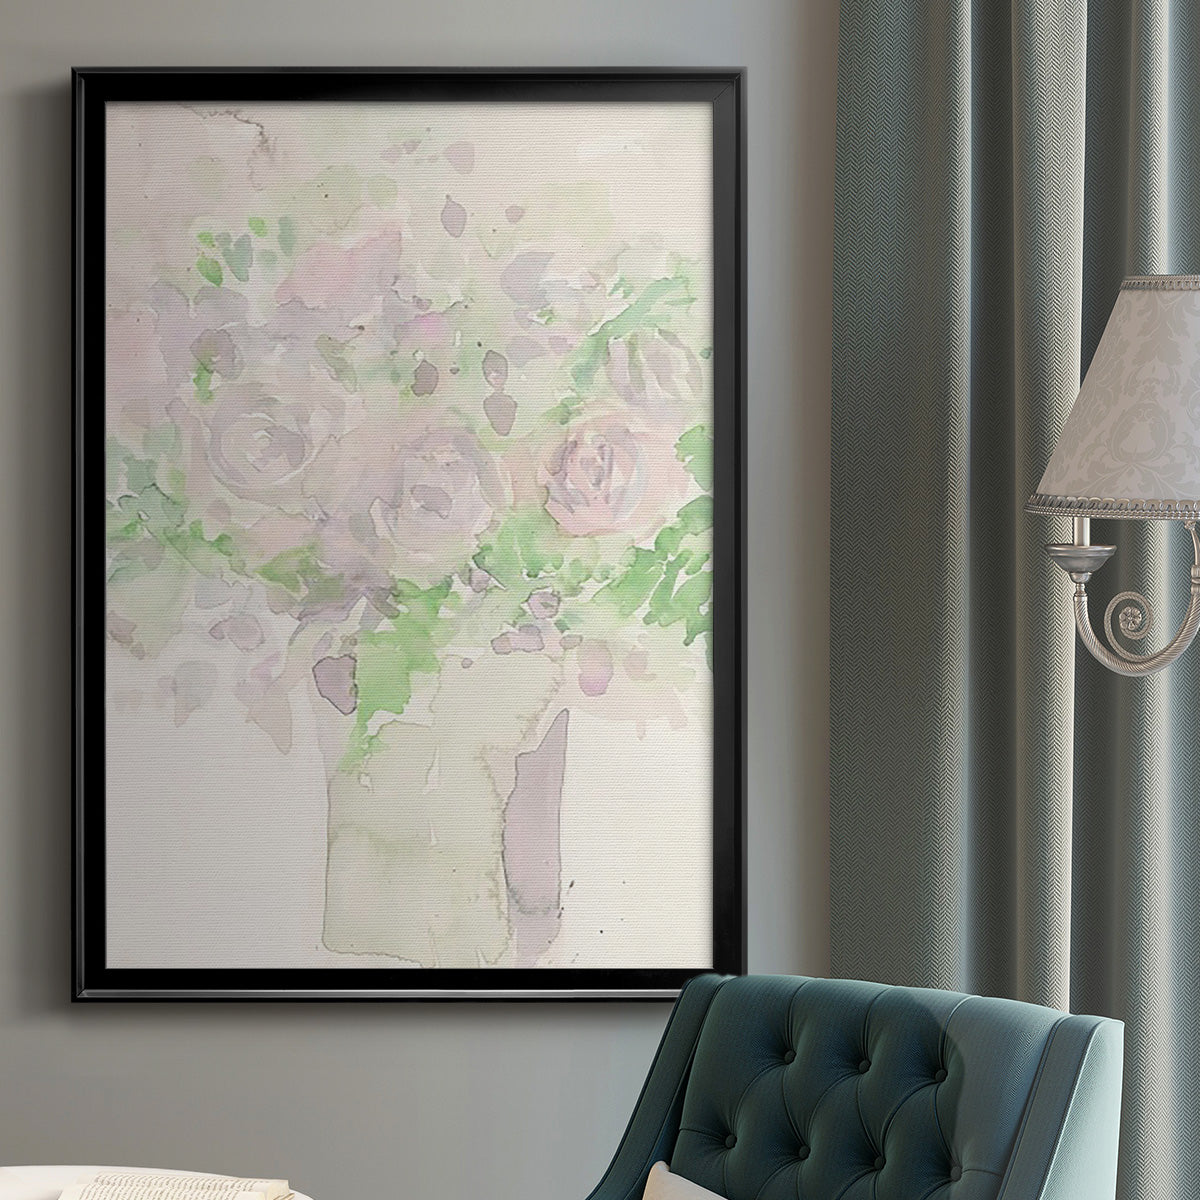 Natural Radiance II Premium Framed Print - Ready to Hang